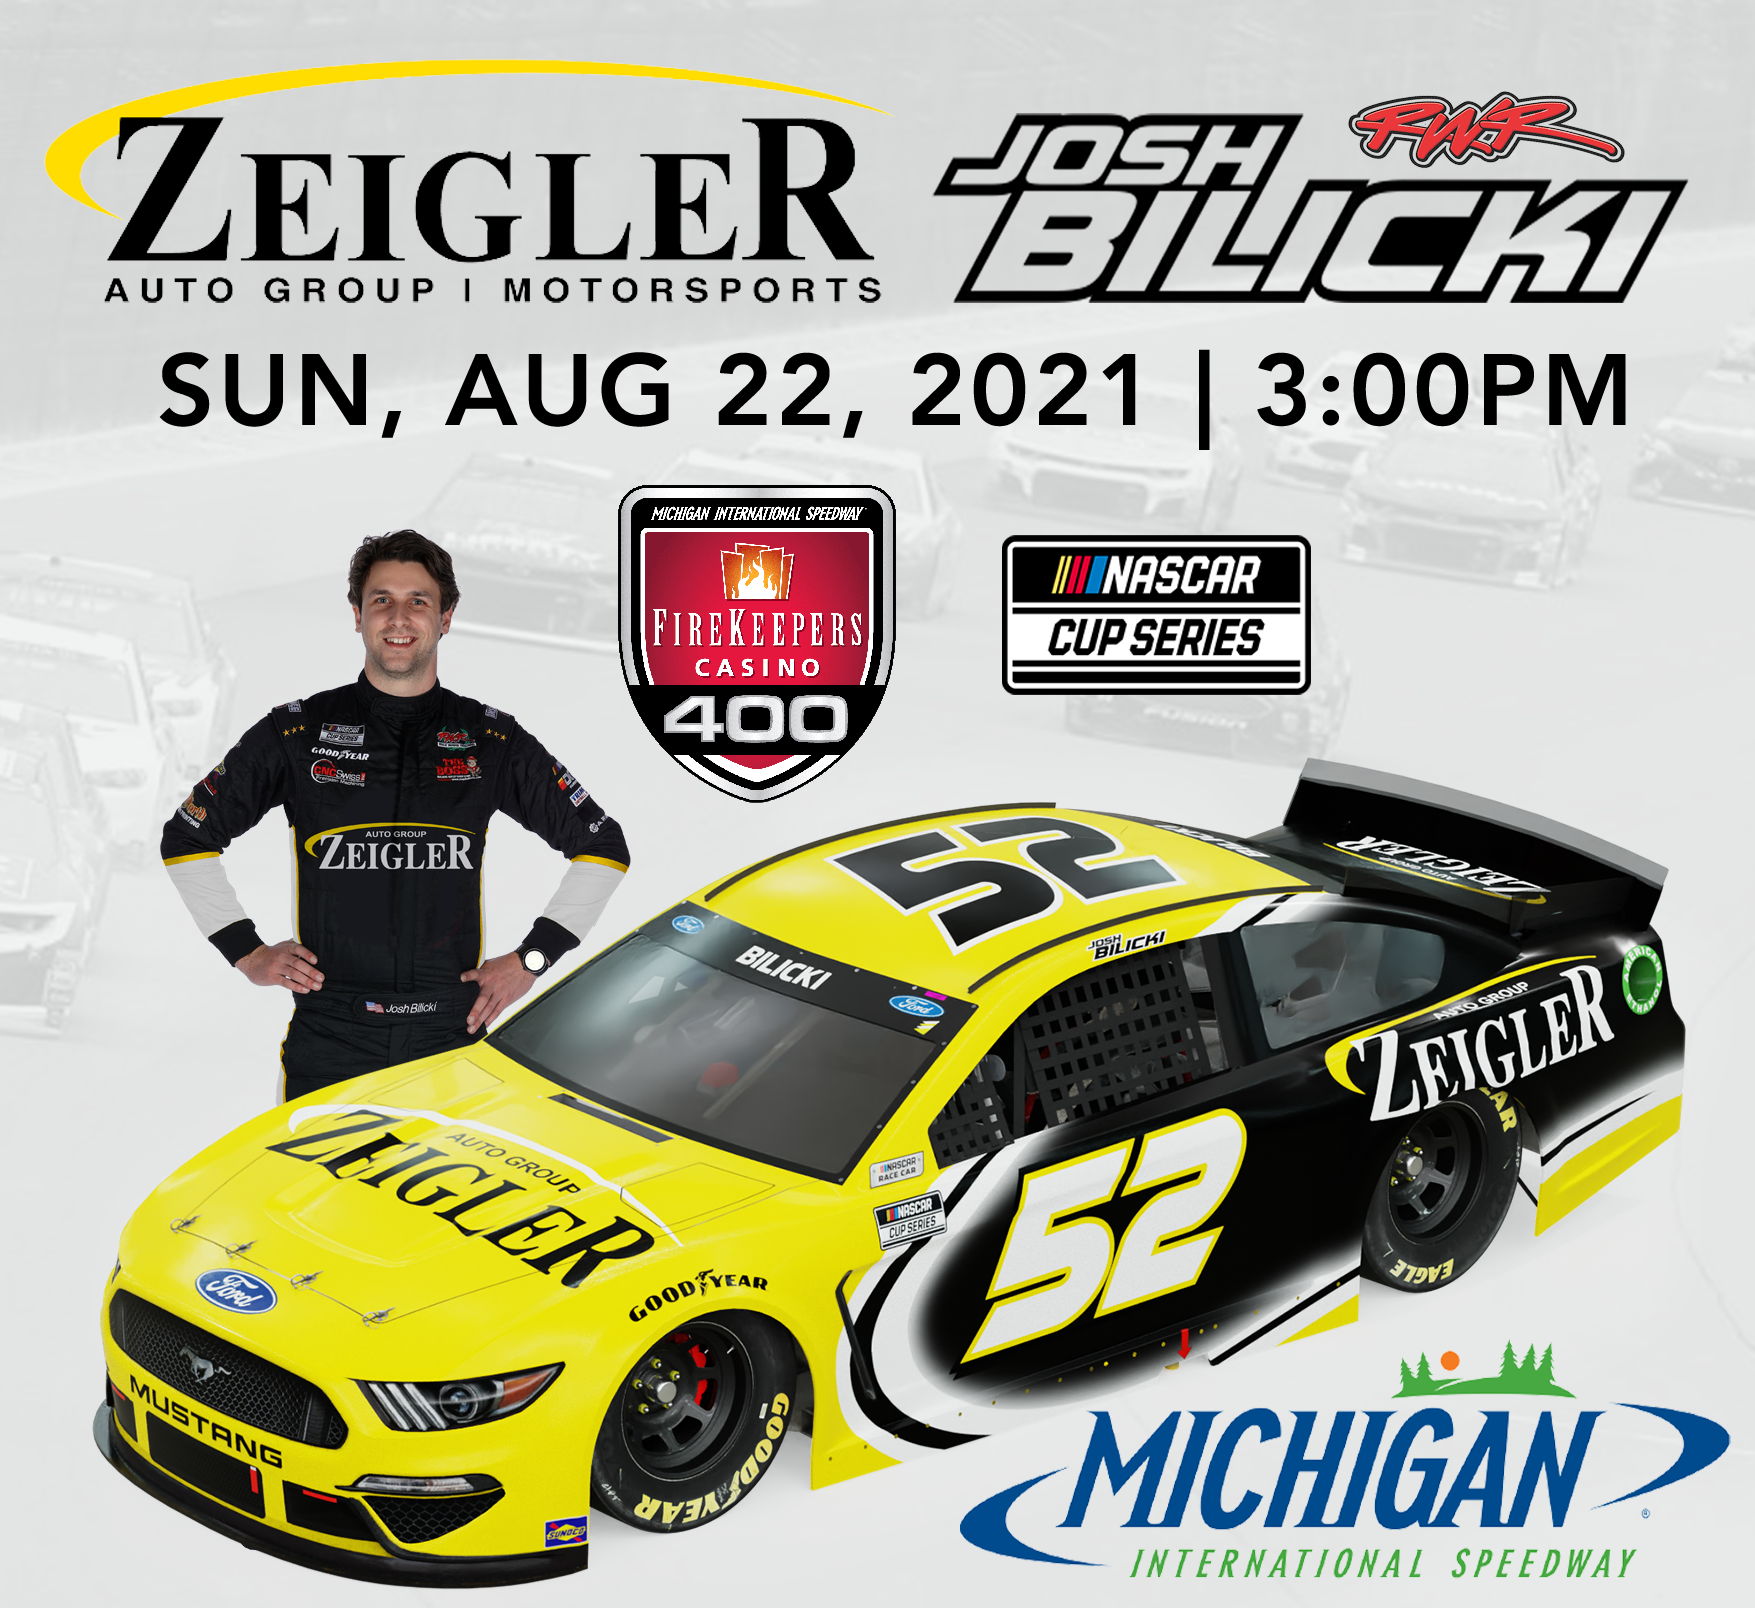 Zeigler Auto Group joins Josh Bilicki at Michigan International Speedway for the FireKeepers Casino 400 of the NASCAR Cup Series on Sunday, August 22, 2021 at 3:00 p.m. EST